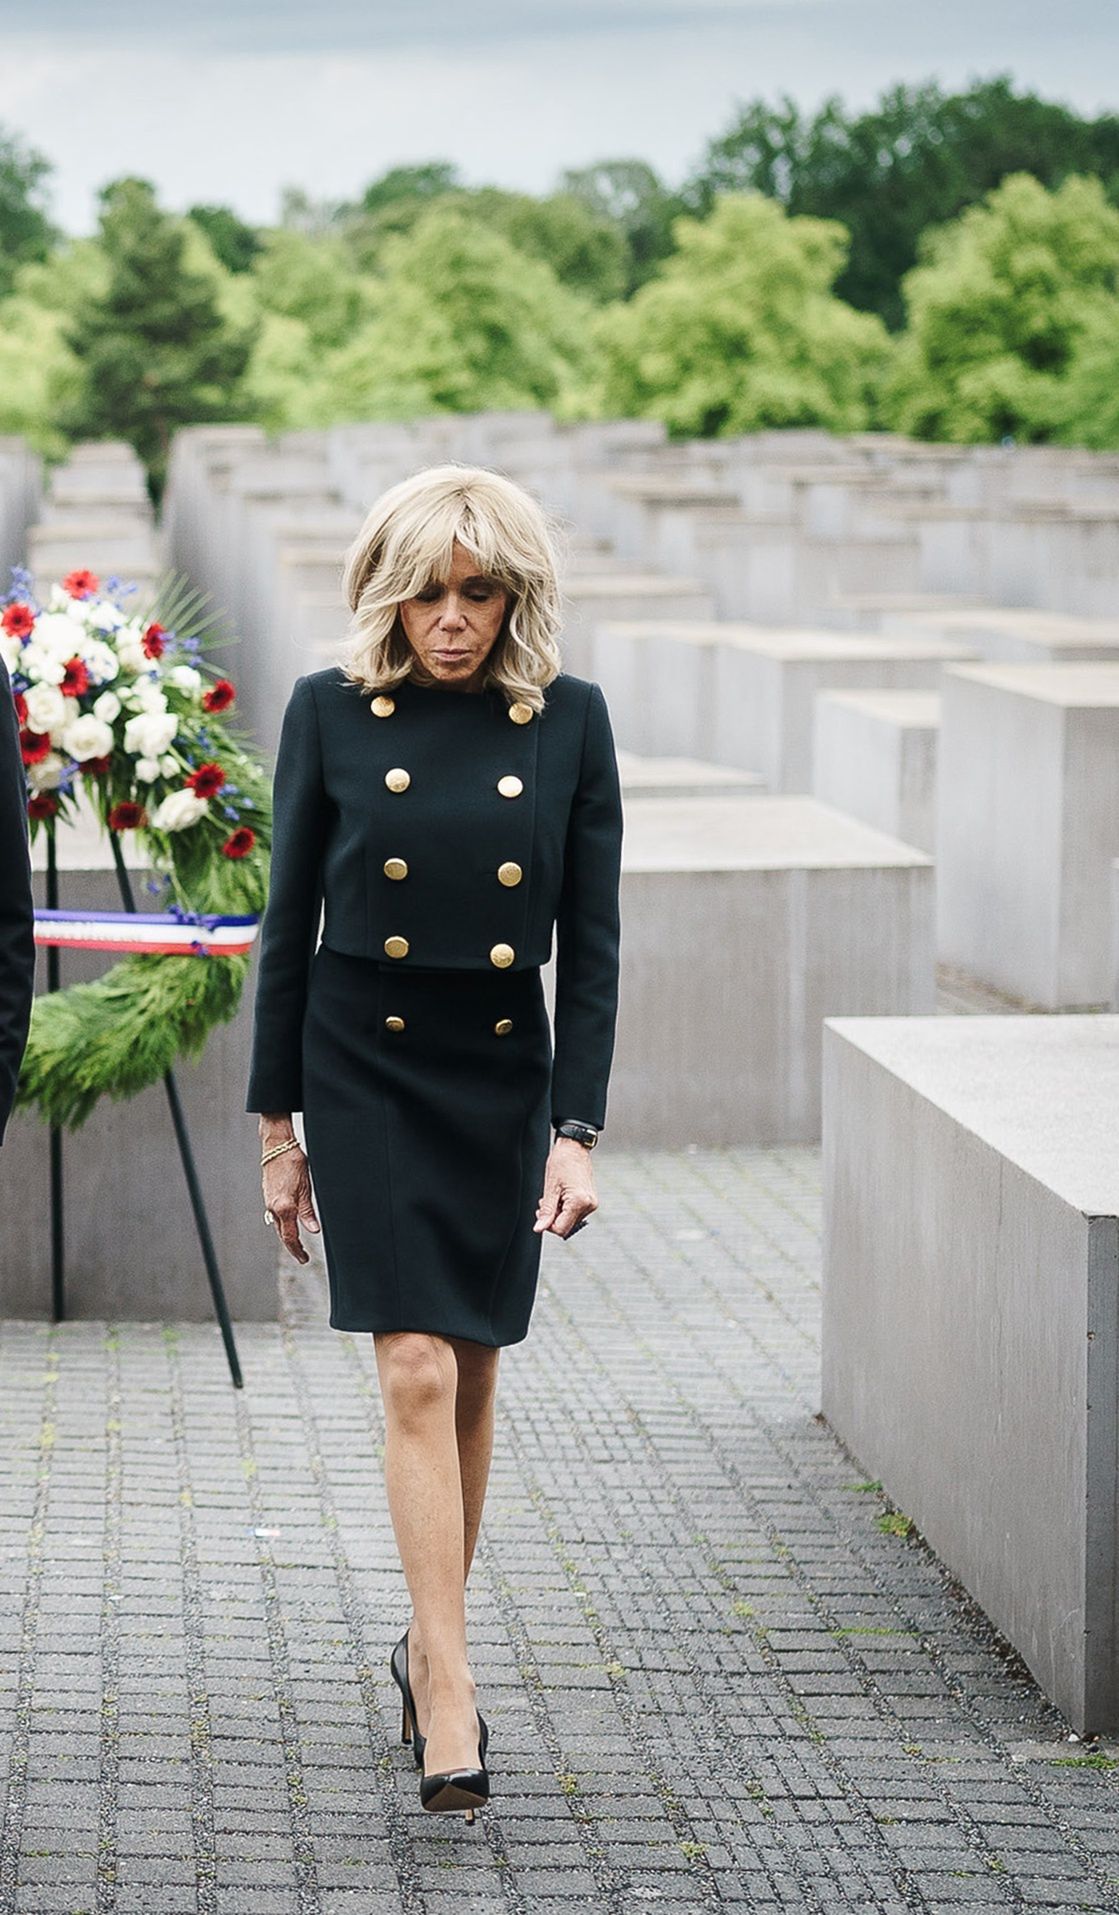 Brigitte Macron during a visit to Germany.